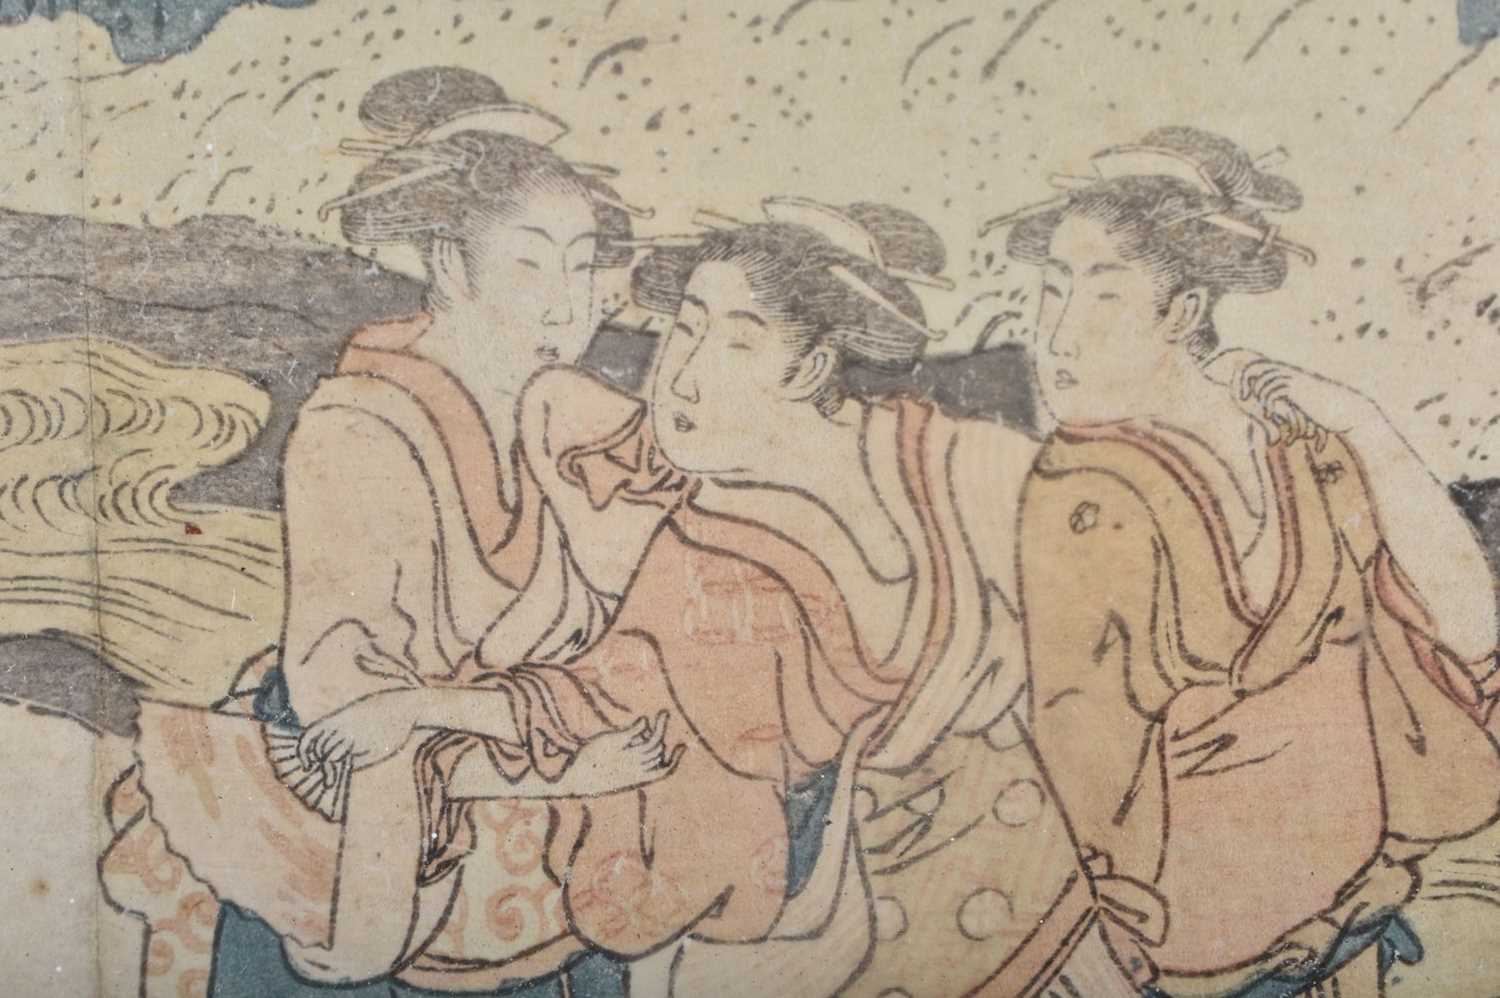 A 19TH CENTURY JAPANESE MEIJI PERIOD WOODBLOCK PRINT depicting geisha and males roaming in a - Image 3 of 5